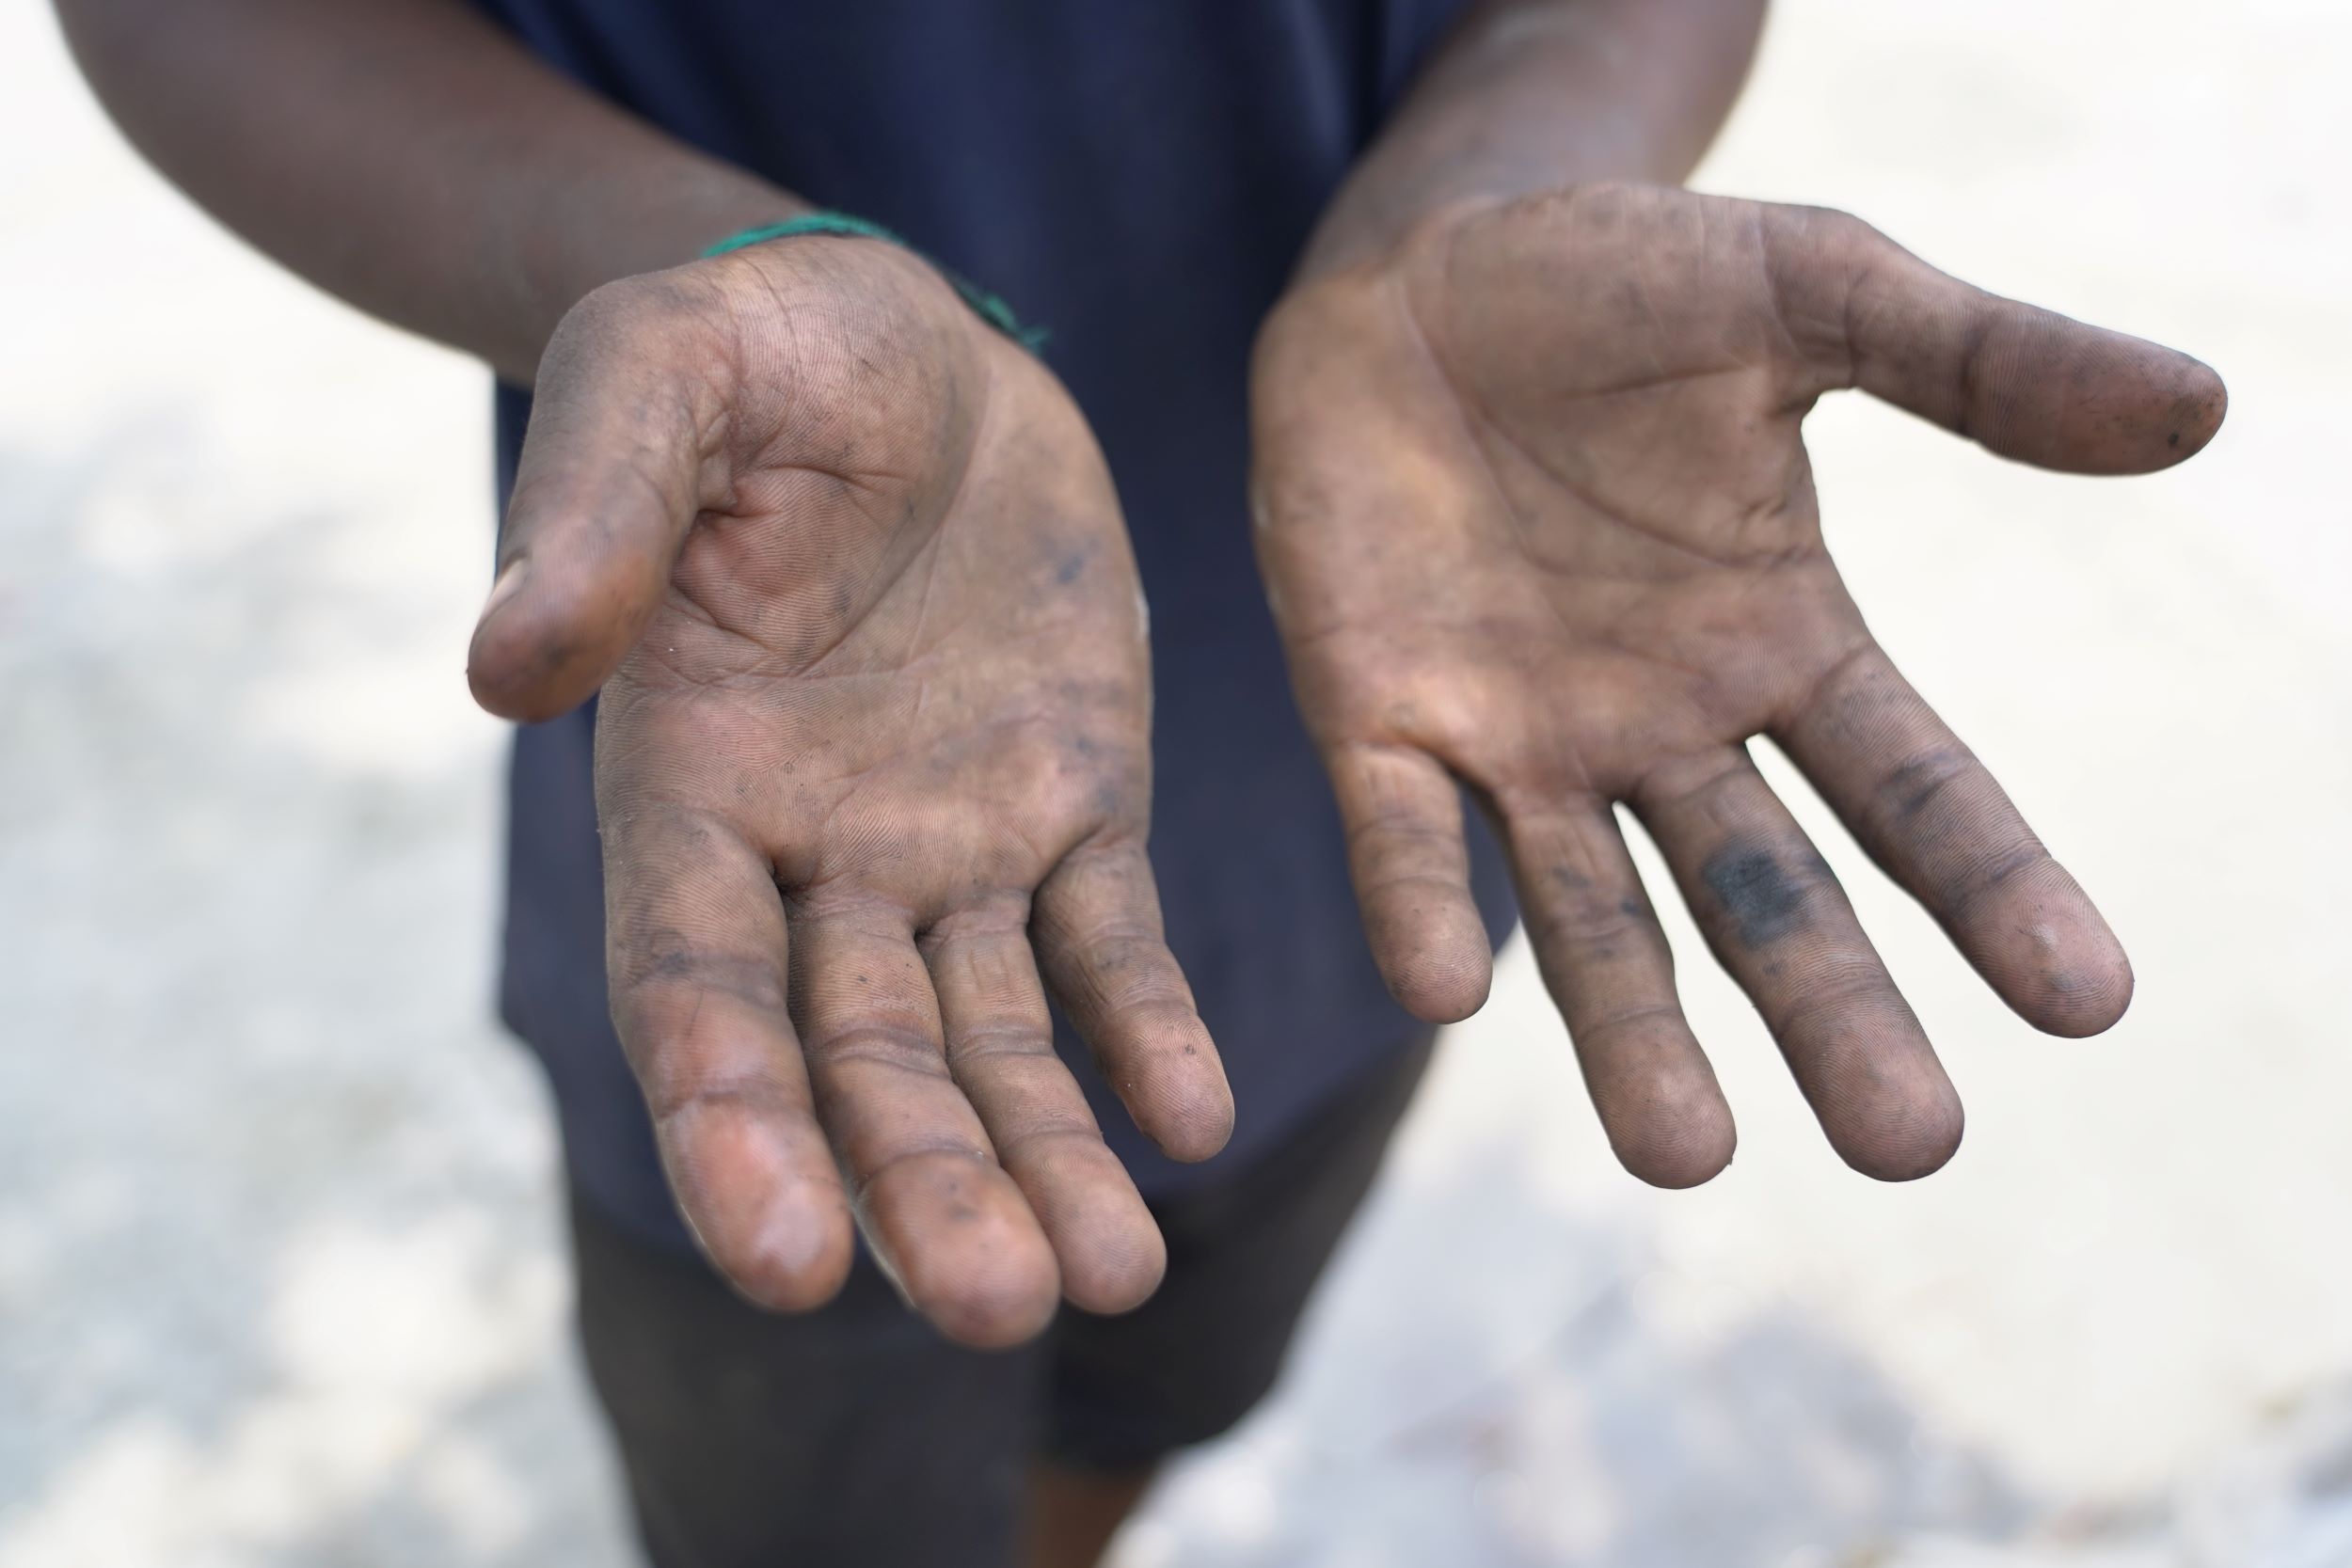 Dirty hands of a young Bangladeshi boy working 12 hours every day